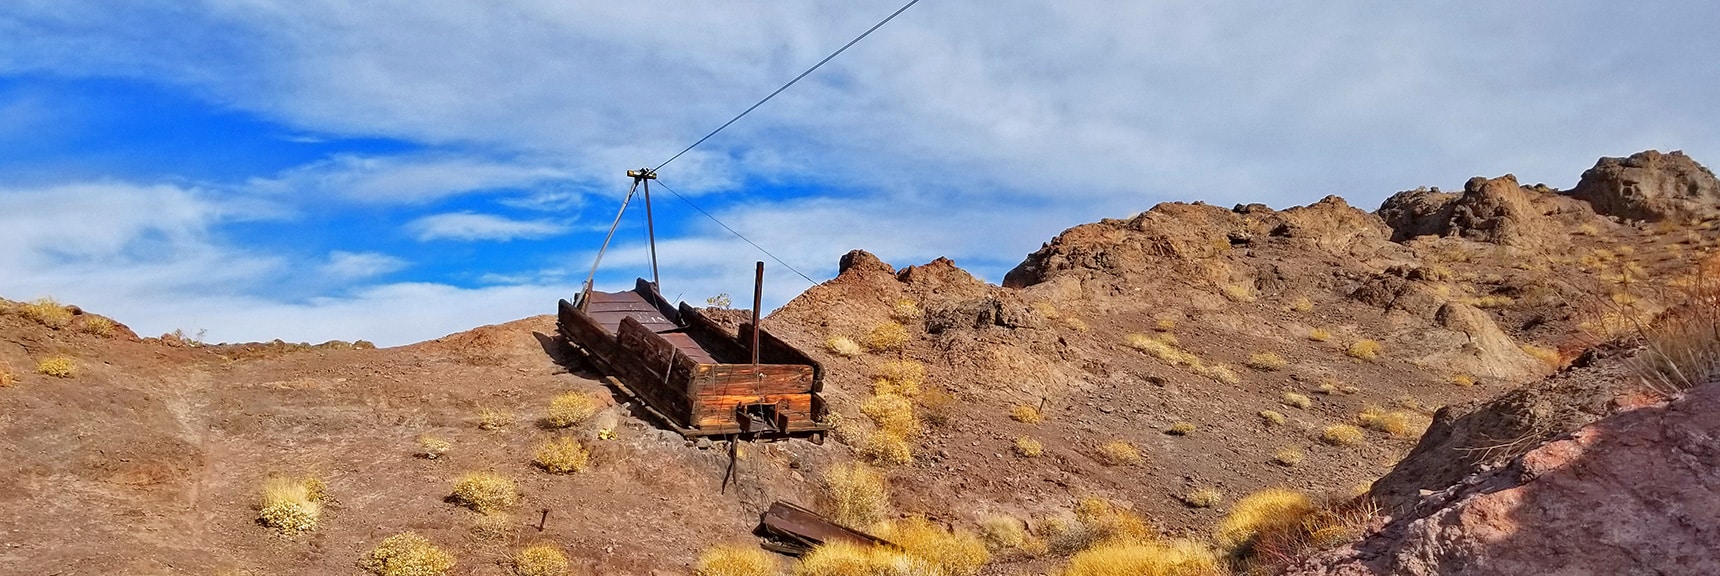 Old Mining Container on Pulley | Arizona Hot Spring | Liberty Bell Arch | Lake Mead National Recreation Area, Arizona